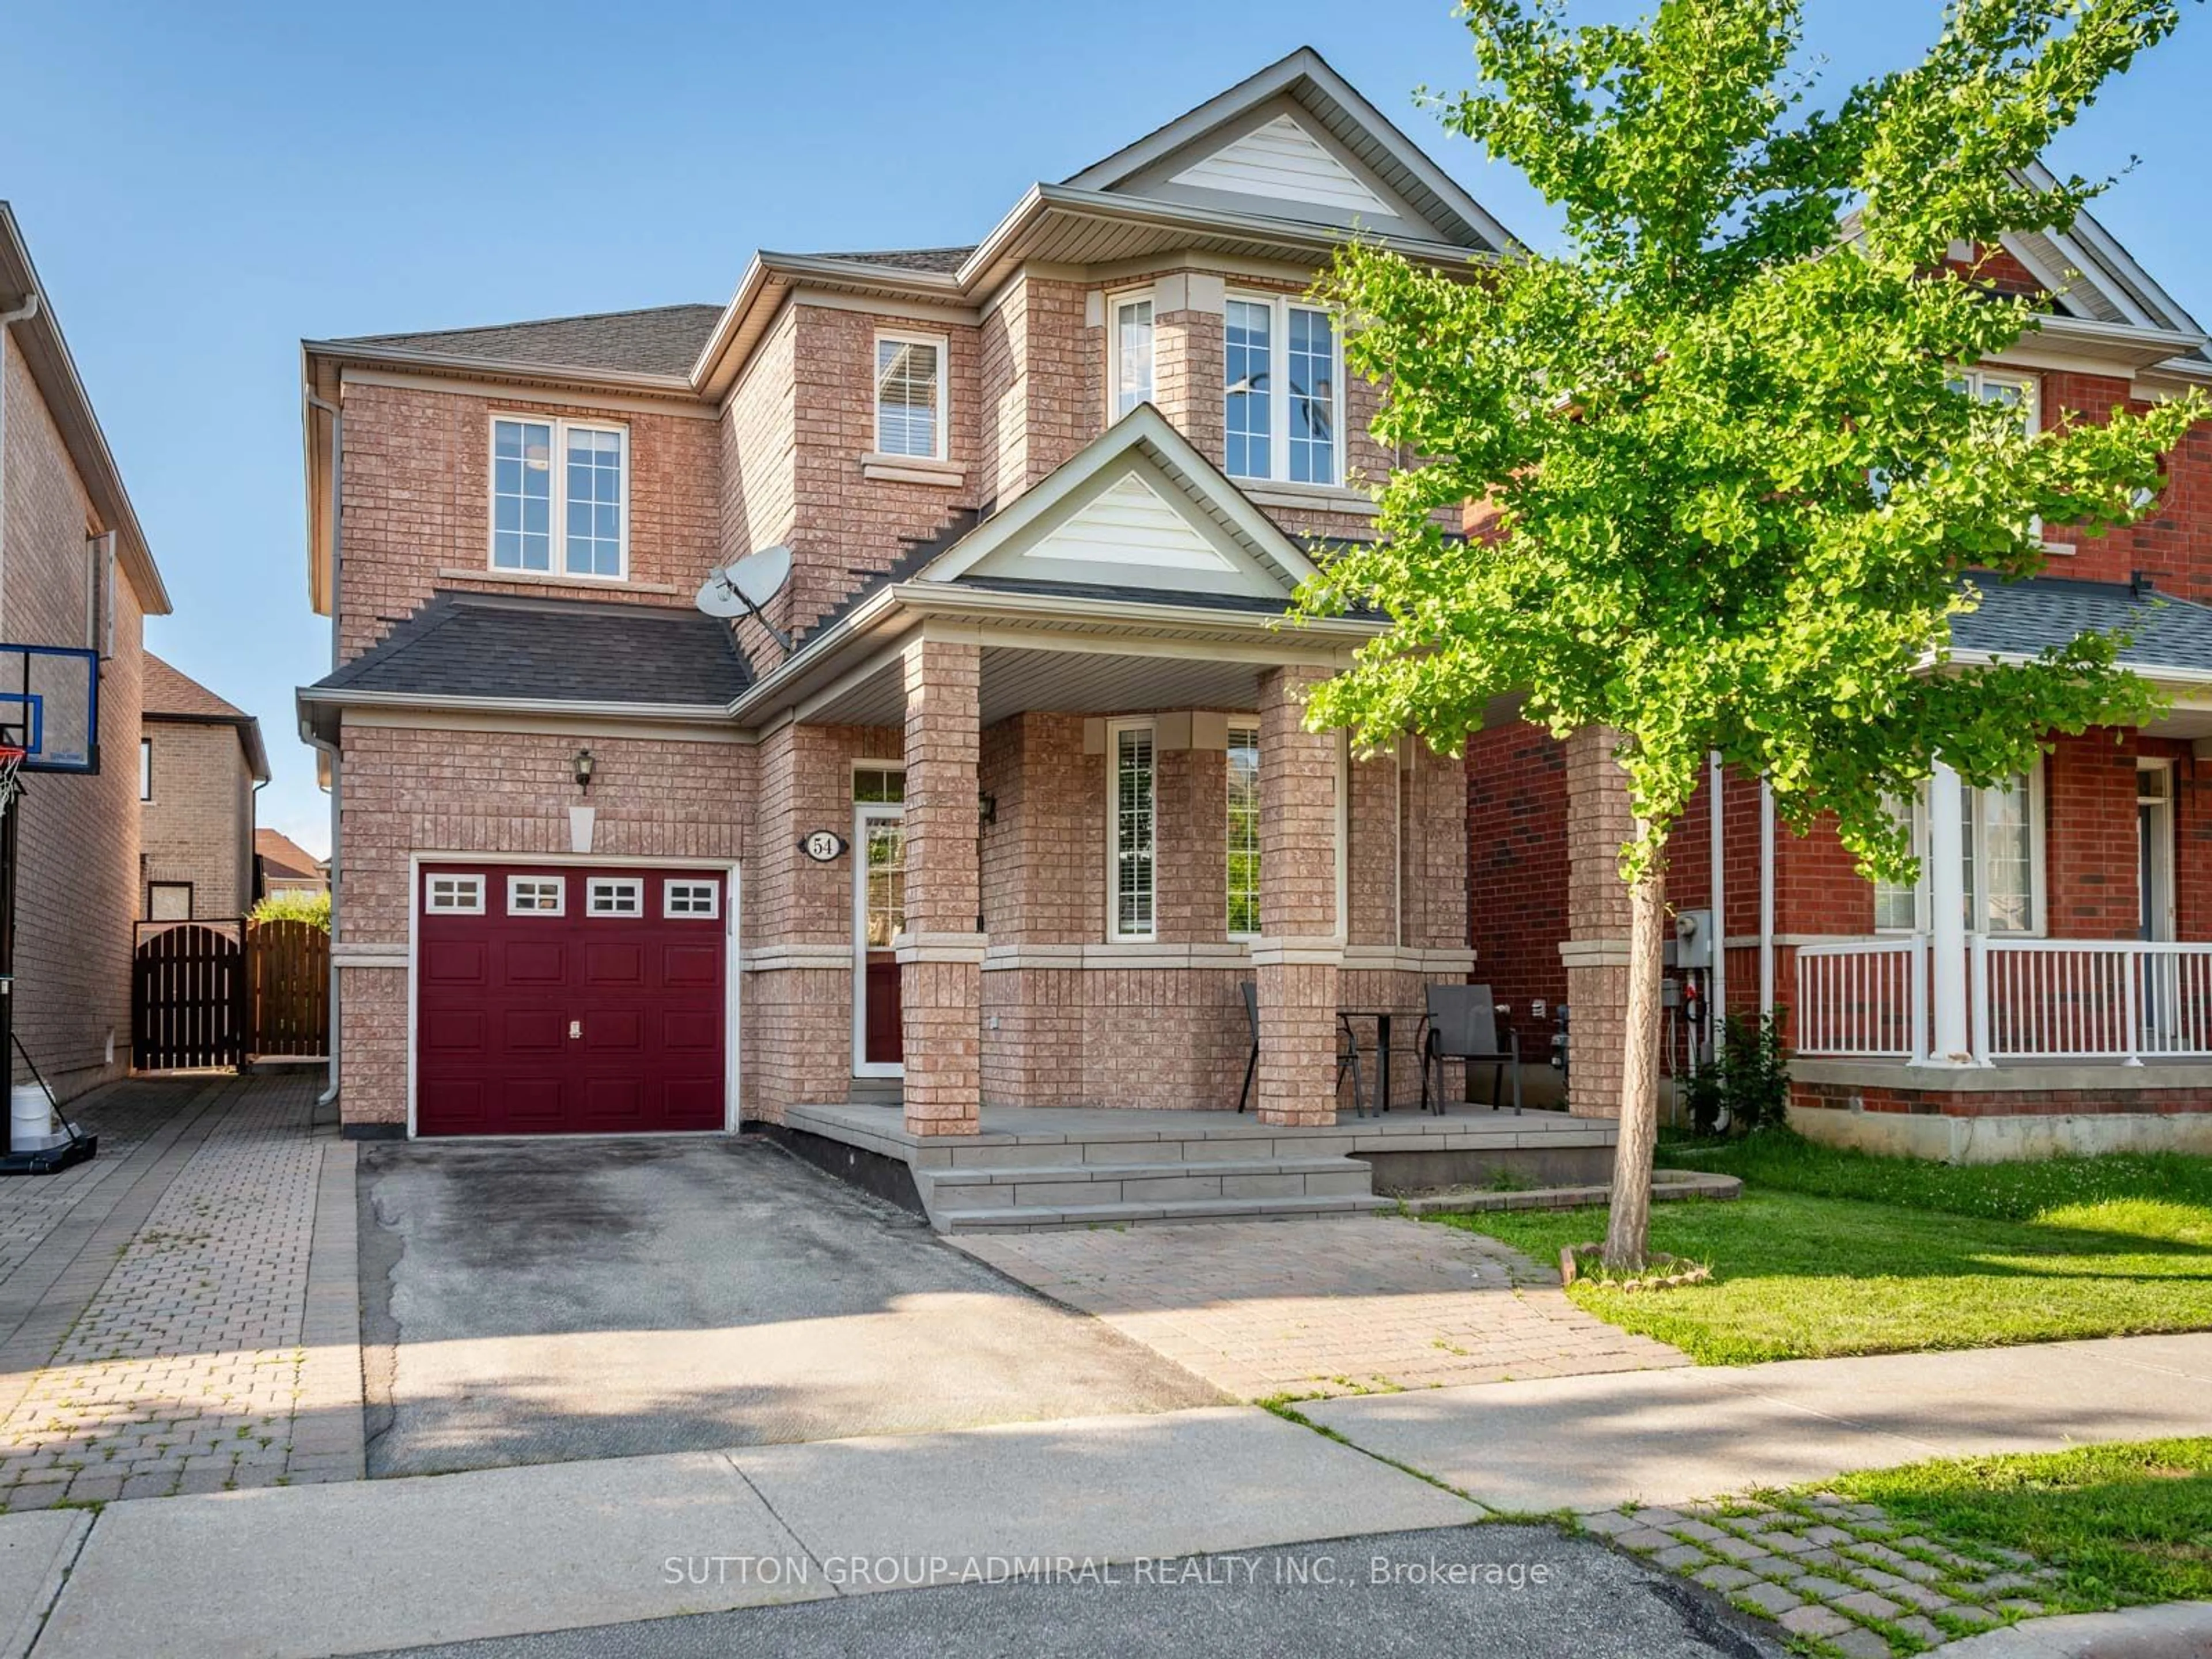 Home with brick exterior material for 54 Saint Victor Dr, Vaughan Ontario L4H 3E3